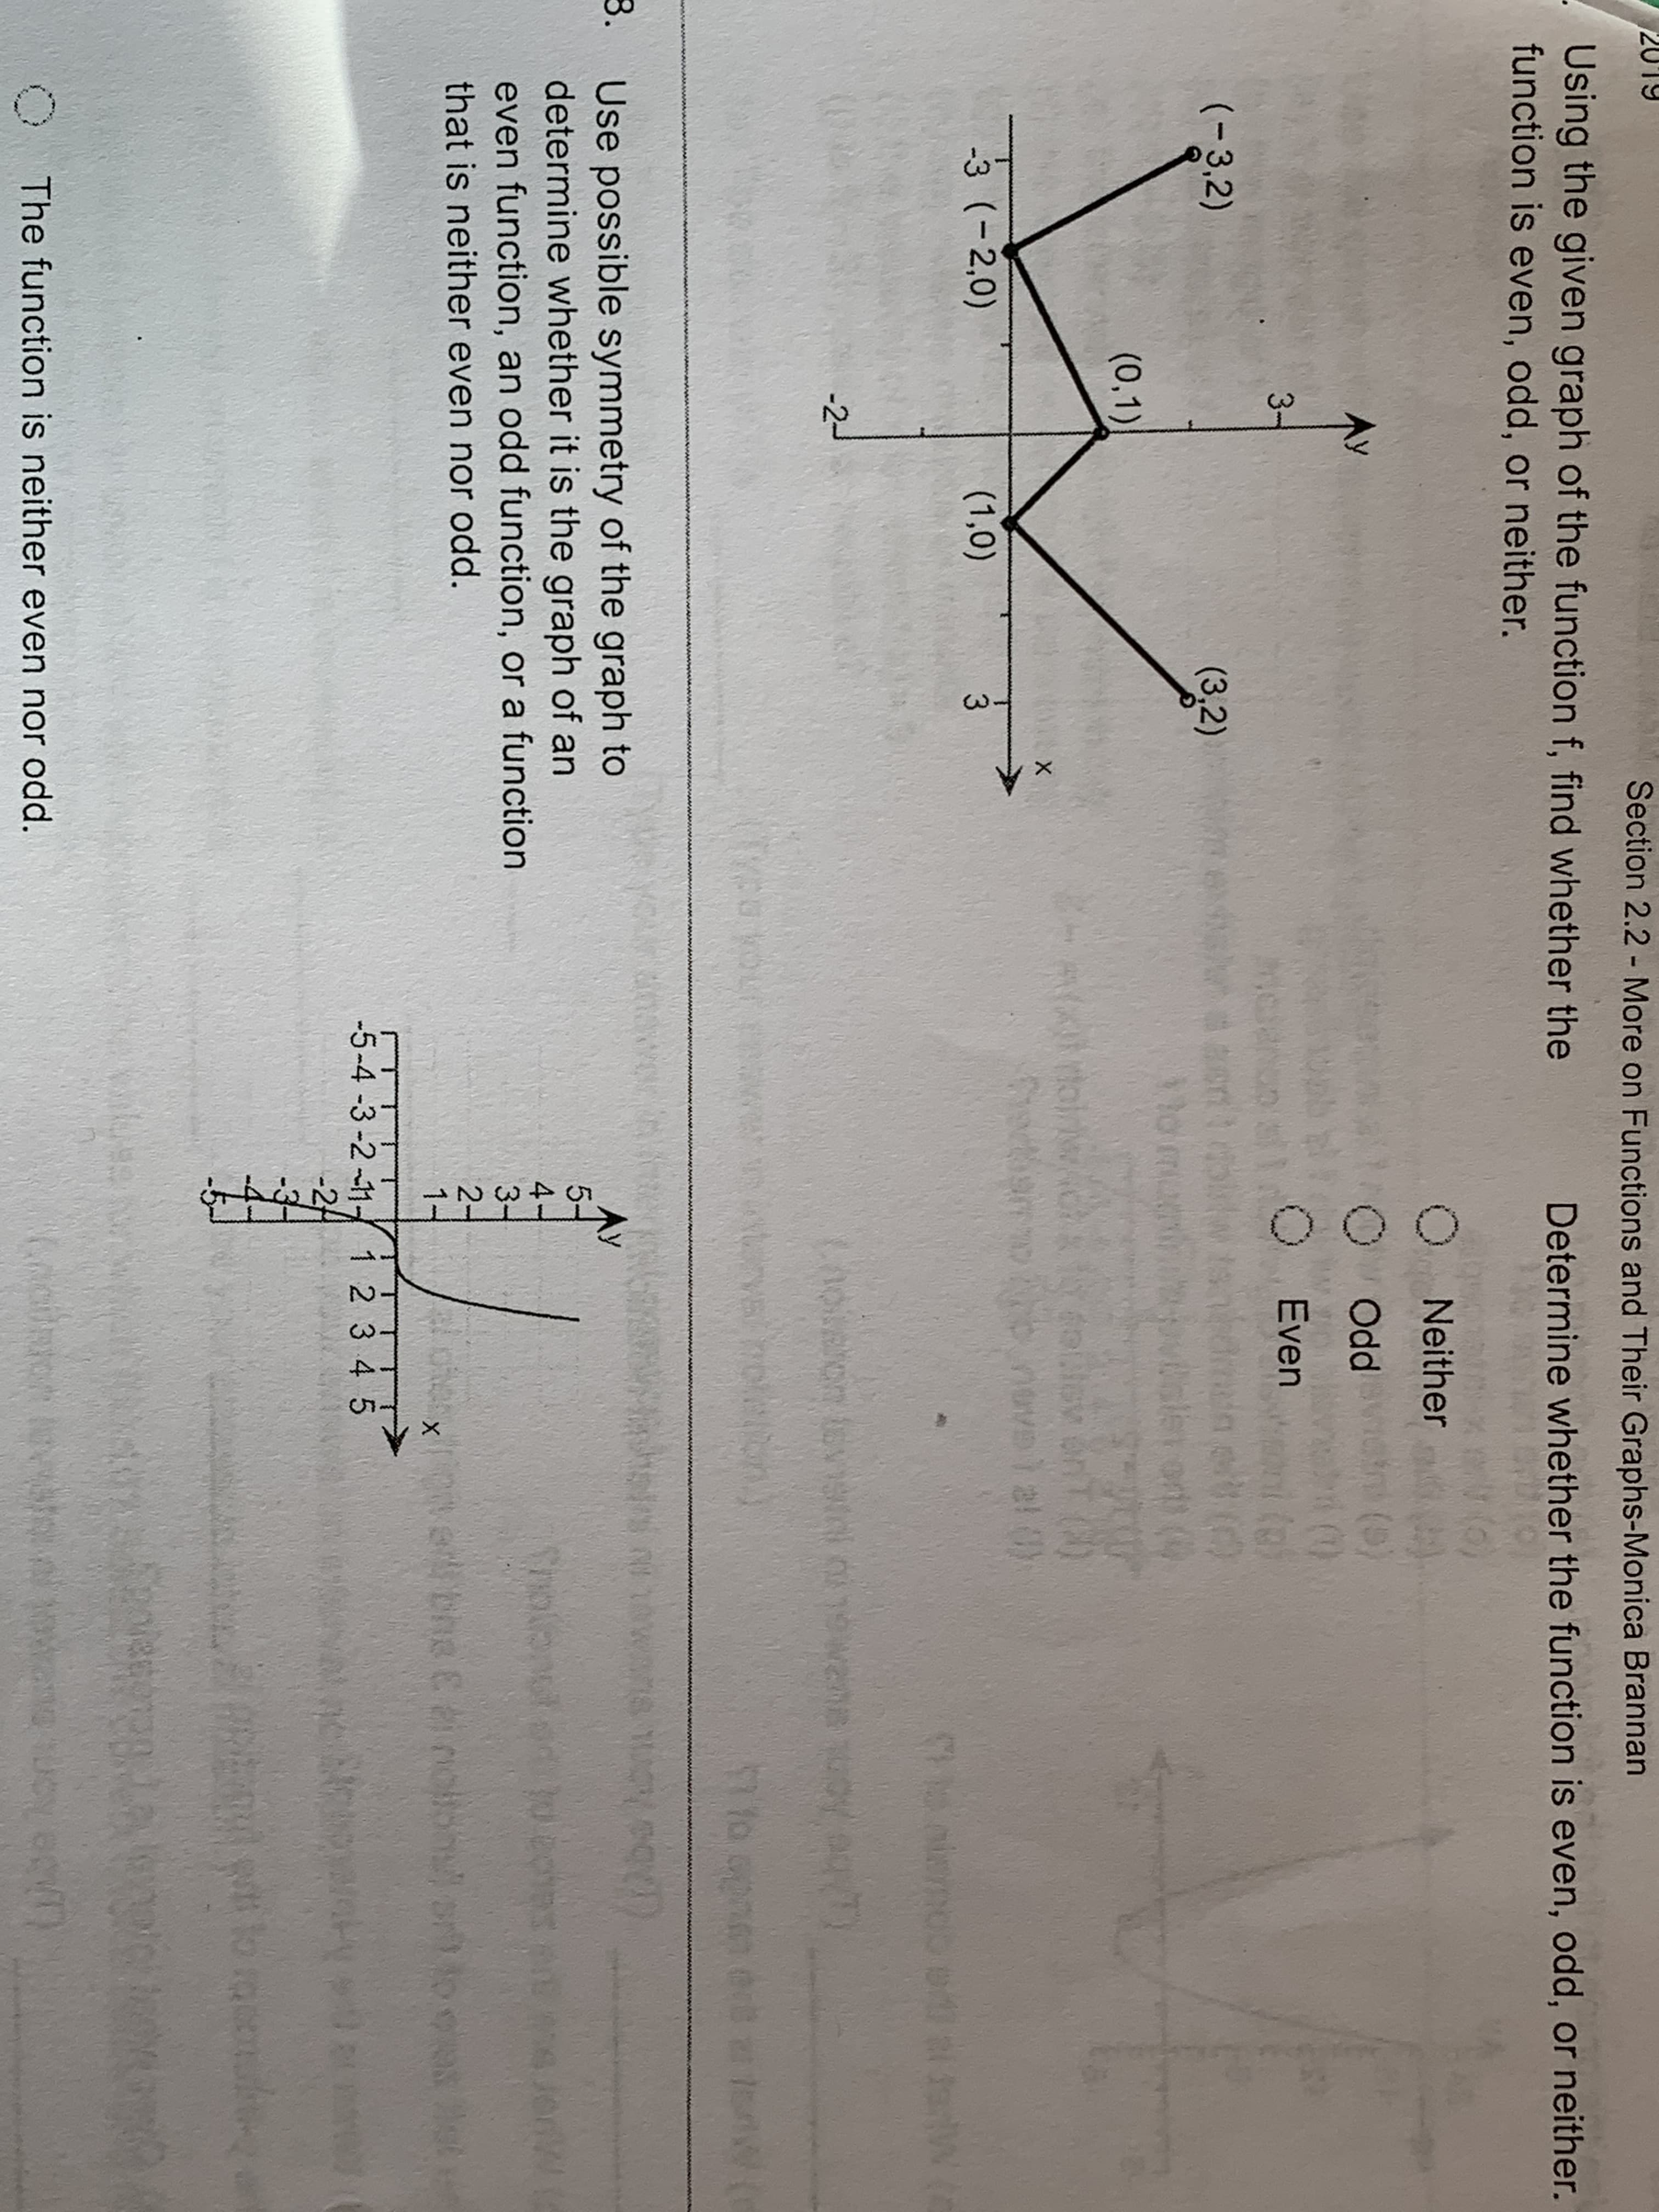 X
2019
Section 2.2 - More on Functions and Their Graphs-Monica Brannan
Using the given graph of the function f, find whether the
function is even, odd, or neither.
Determine whether the function is even, odd, or neither.
O Neither
AY
OOdd
(6)
OEven
(o
3-
(-3.2)
(3,2)
n
Vnlen
(0.1)
rtoww
Ch
430s OnT
no nevs tal 0Y
-3 (-2,0)
(1,0)
3
Saeot
8ts
-2
on tavistai n1w2ne
Tveour
fo apne es
KCe
s
eoV!P
3.
Use possible symmetry of the graph to
determine whether it is the graph of an
even function, an odd function, or a function
that is neither even nor odd.
Spole
to cc1
3-
2-
1-
ohos
e Che E shu
o Hot
-5-4-3-2-11-1 2 3 4 5
-24
N lo acotu
1 38
6200R
Q davig
The function is neither even nor odd
Se lon: bug
